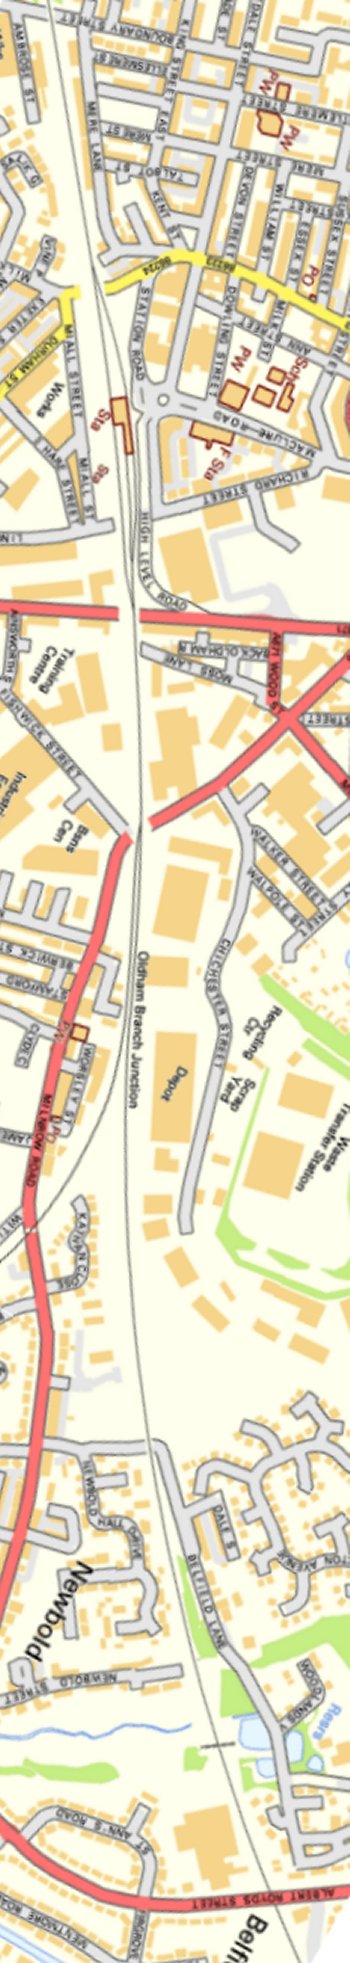 Section from Ordnance Survey OpenSource Mapping 2013 showing the L&YR railway line at Rochdale Railway station